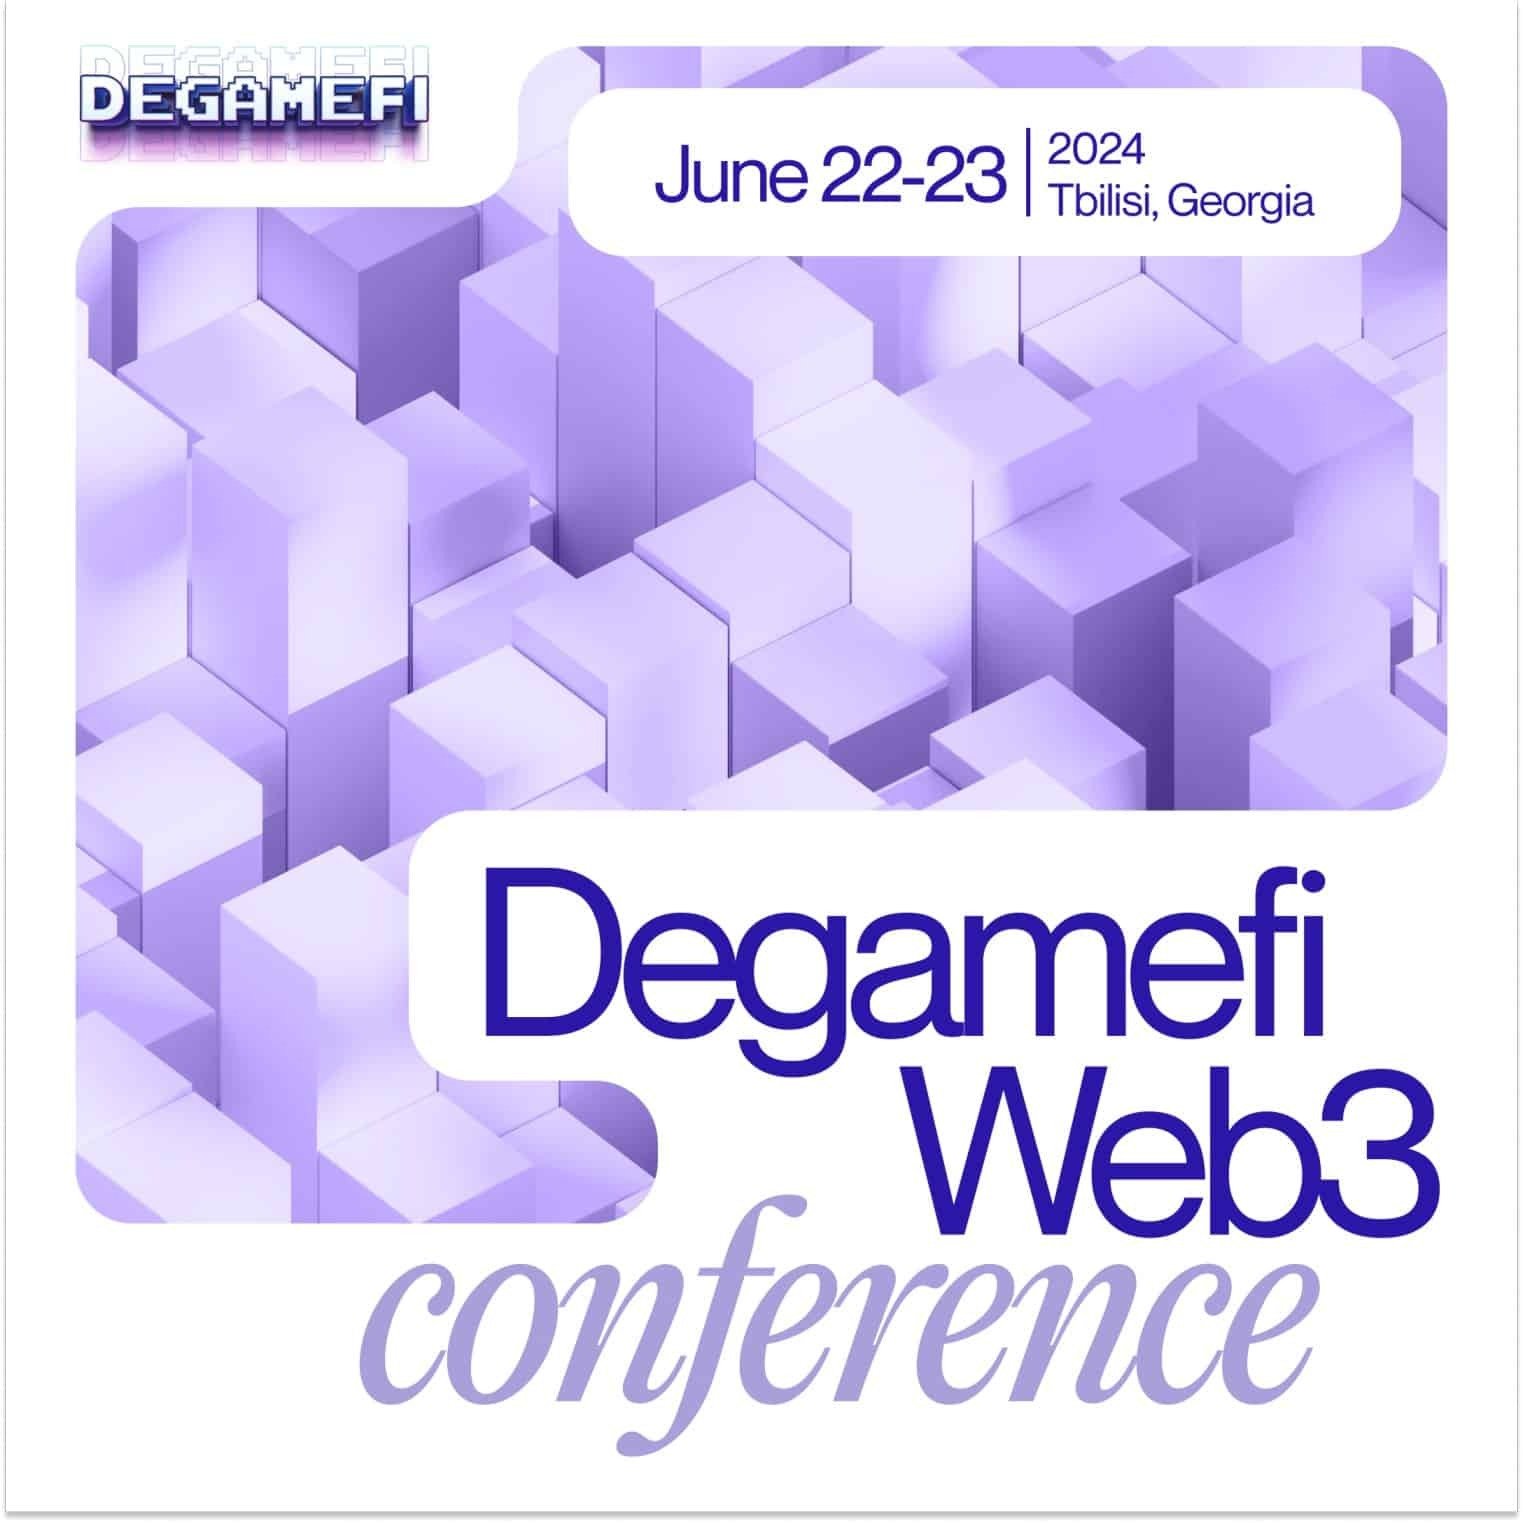 International Web3 Conference Hosted by DeGameFi